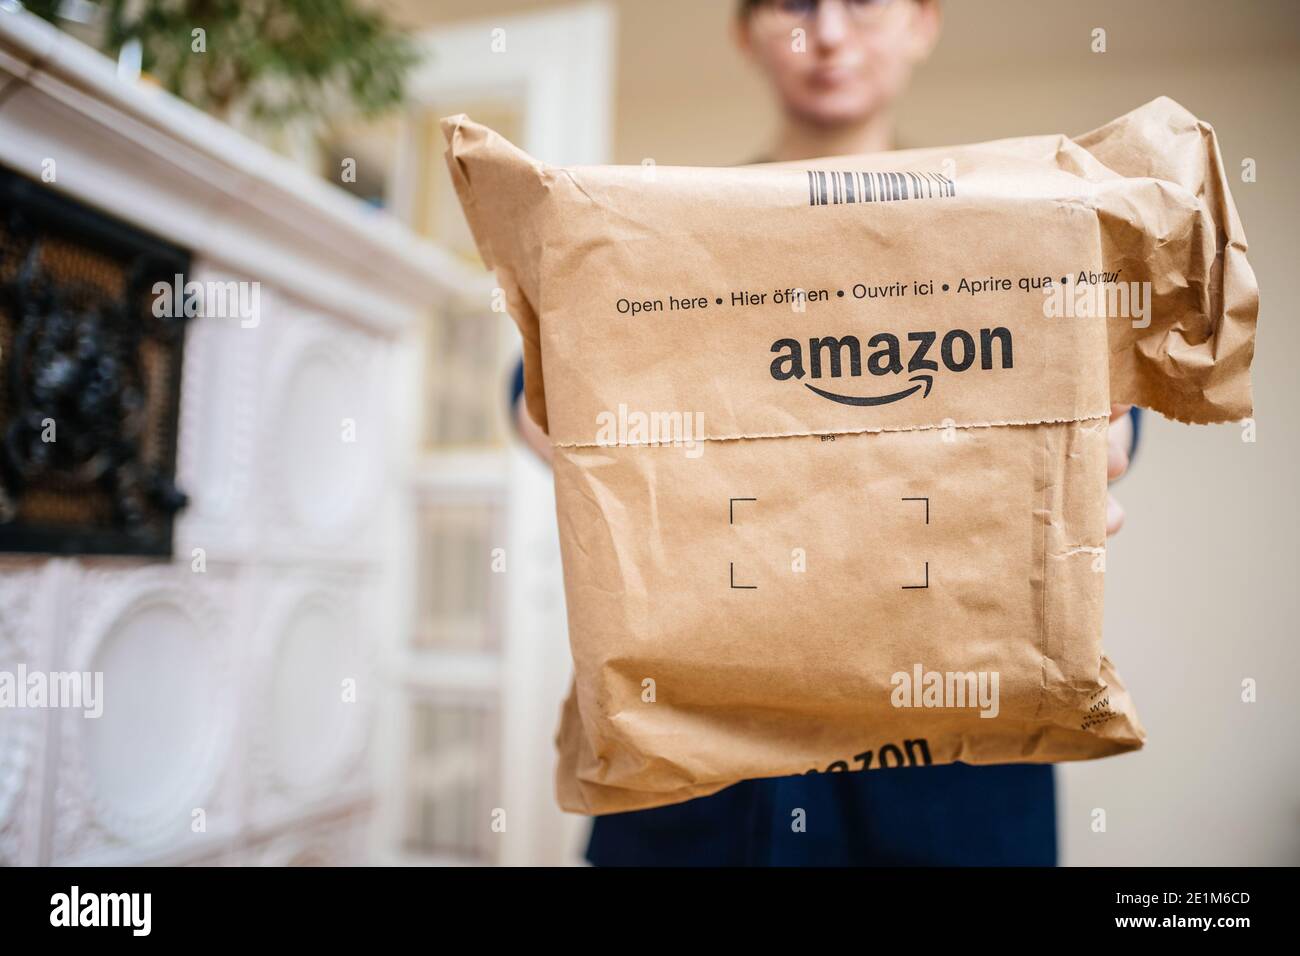 Paris, France - Dec 13, 2020: Front view of woman holding new design for the Amazon Prime package parcel with special indication markets open here in Stock Photo